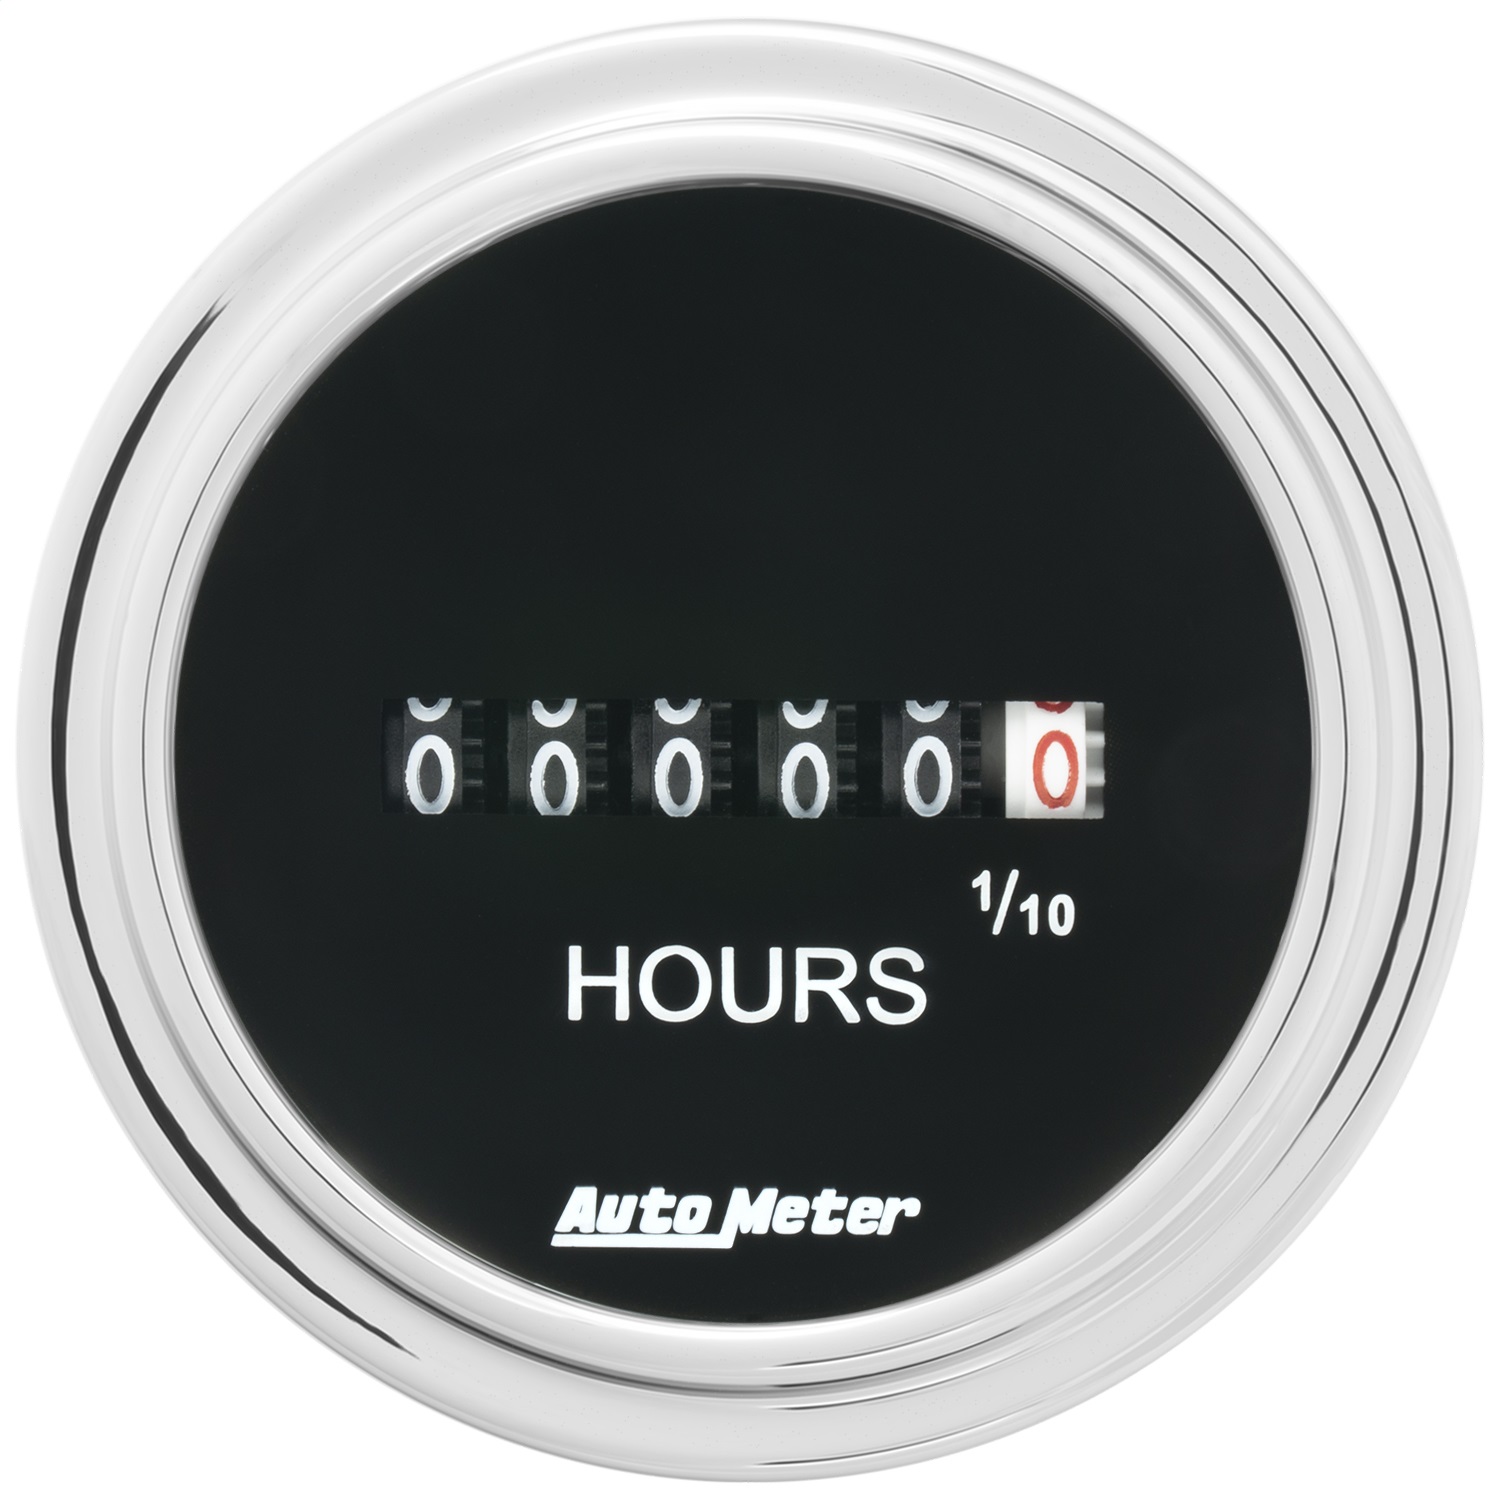 Auto Meter Auto Meter 2587 Traditional Chrome Electric Hourmeter Gauge